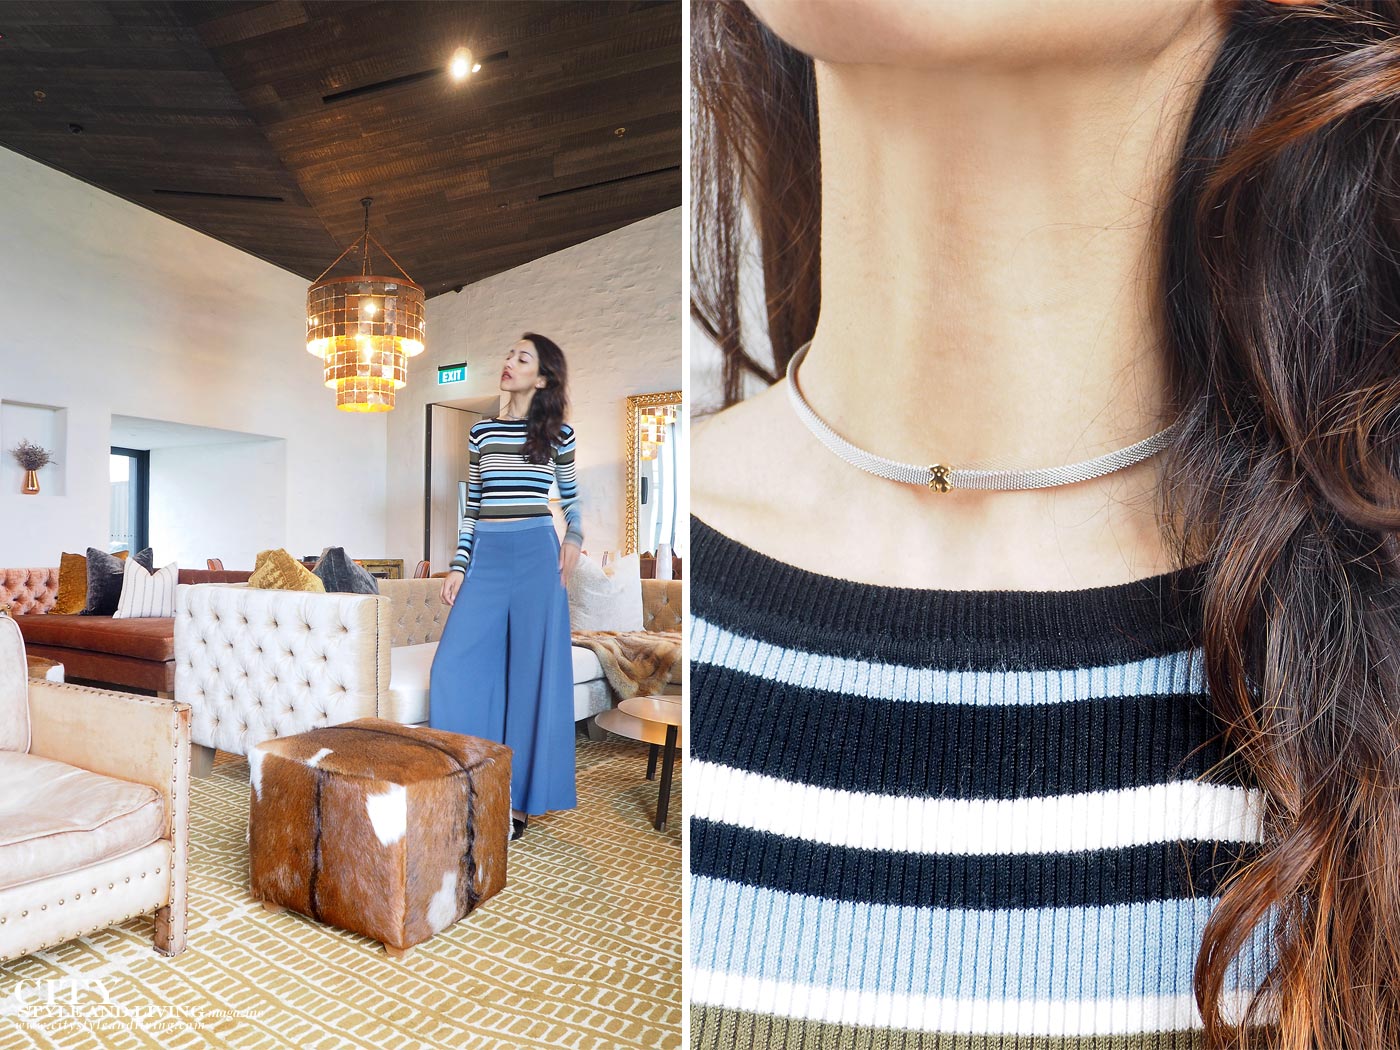 City style and living magazine Editors Notebook style fashion blogger Shivana M kinloch club clubhouse great room culottes and striped croptop closeup of tous necklance